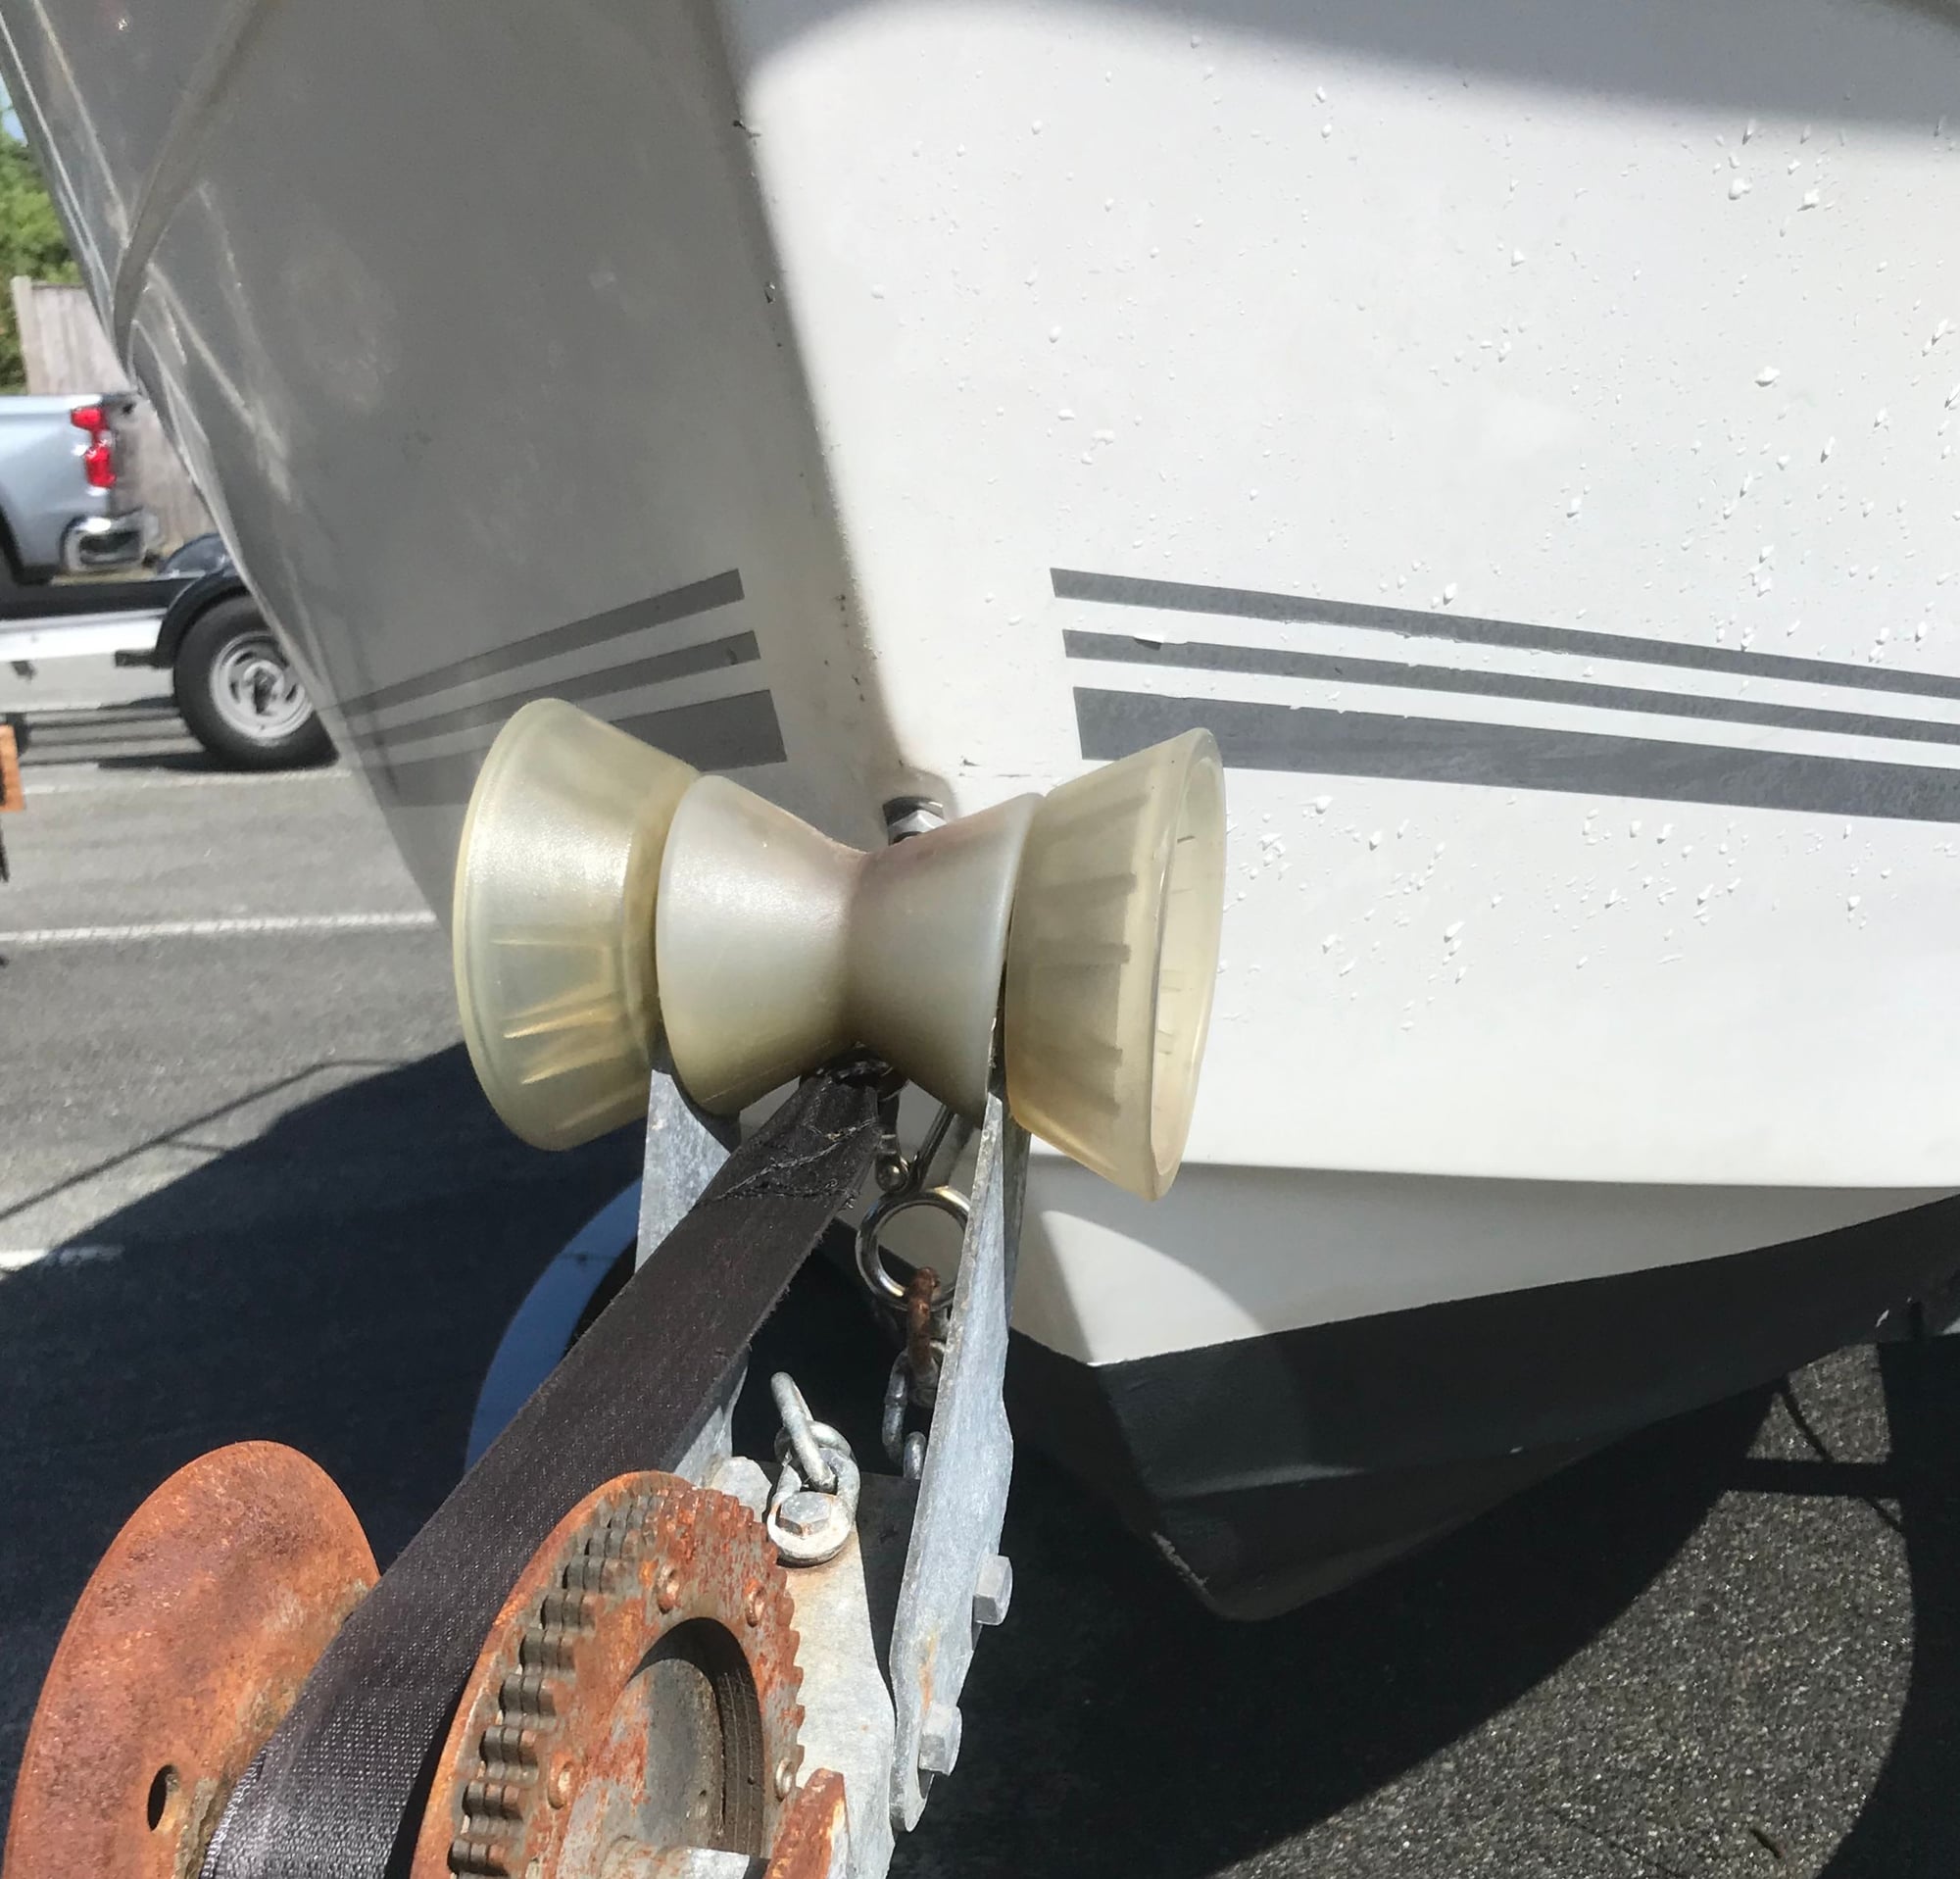 Replaced some rollers, boat now sits different on trailer - The